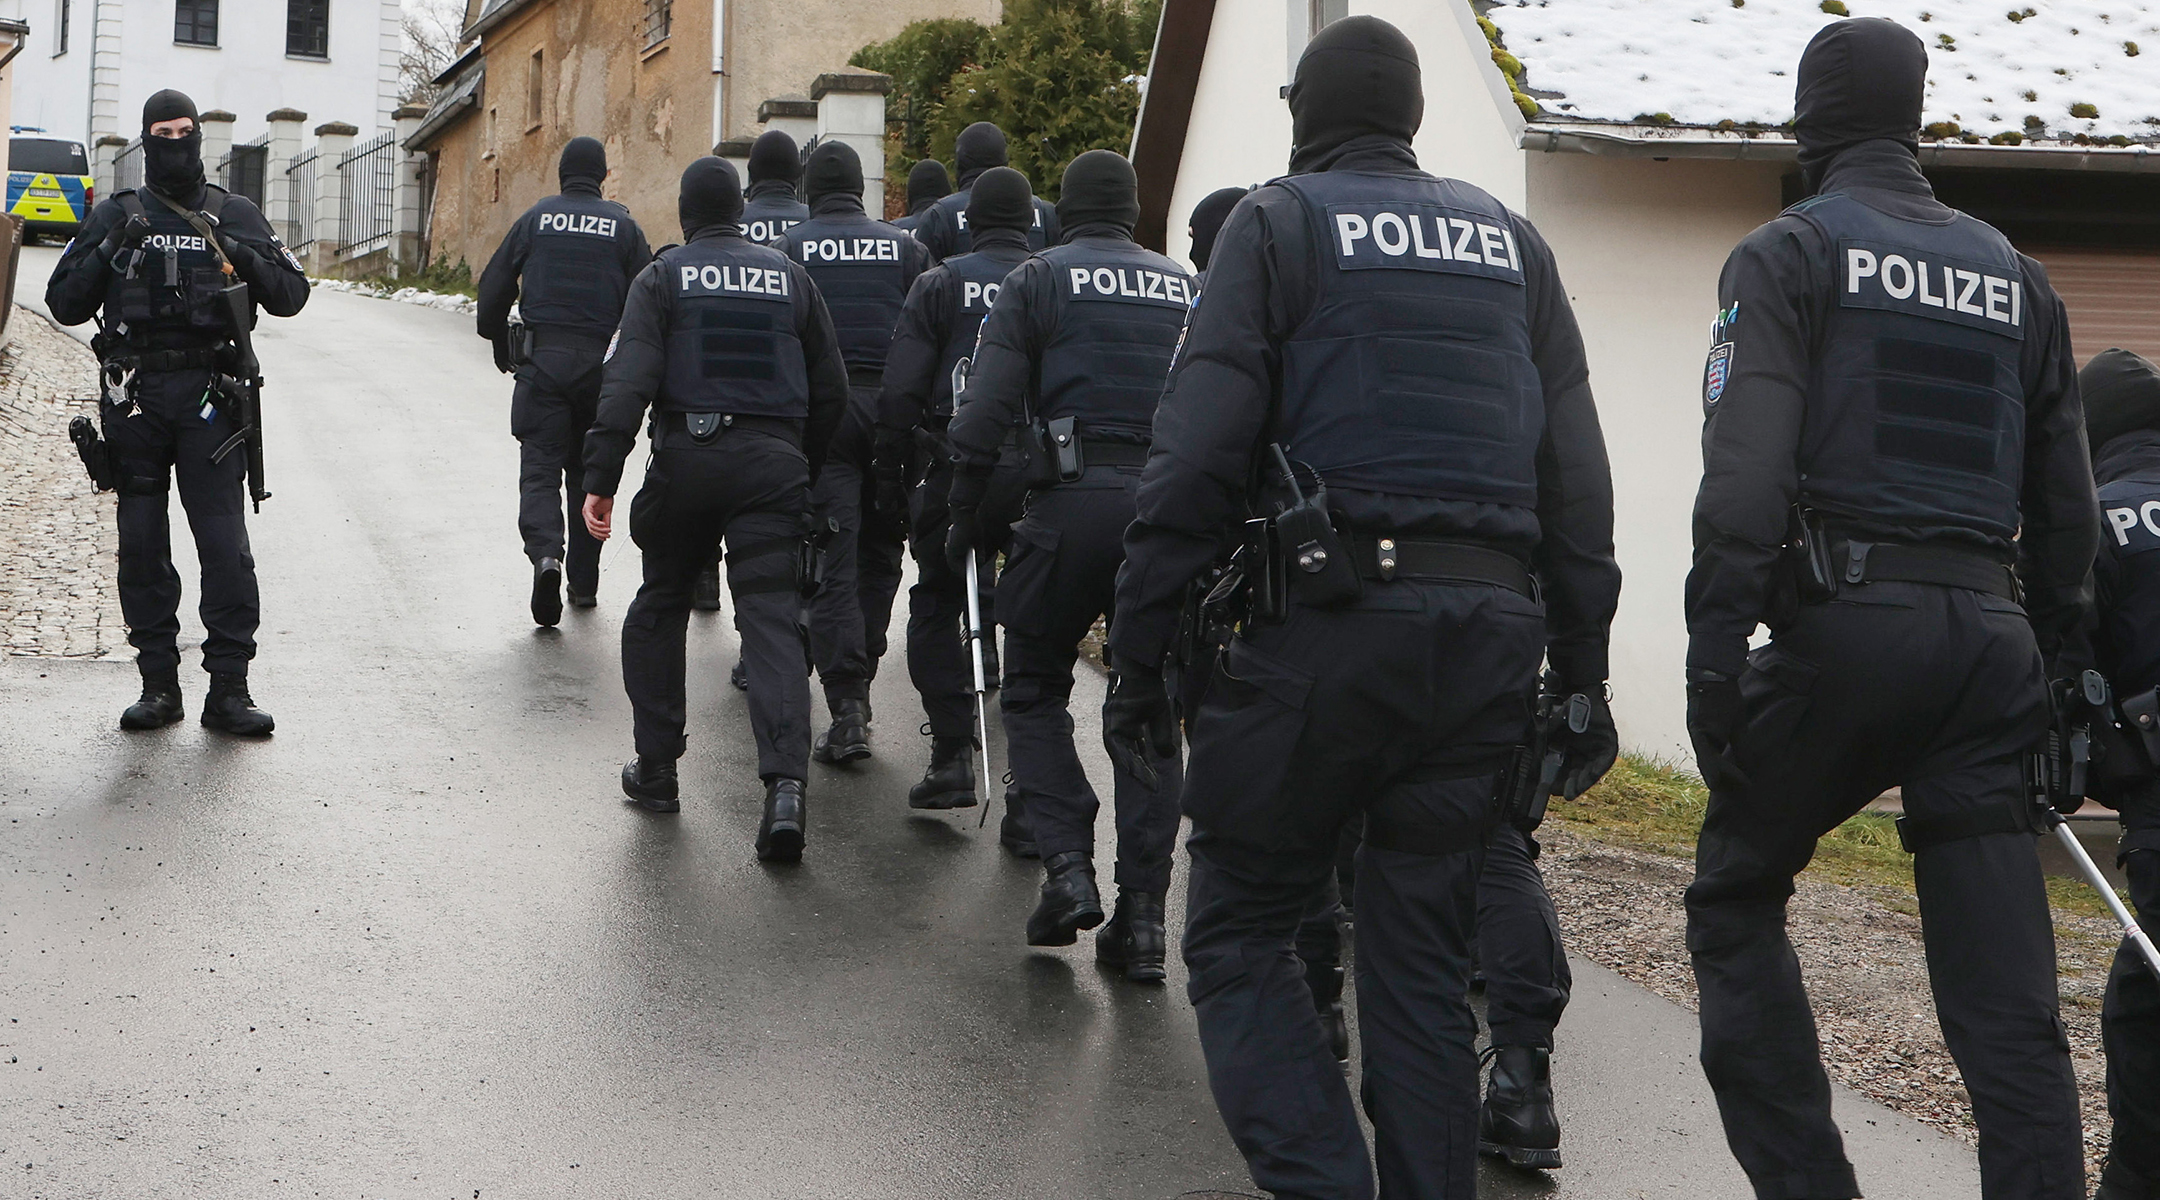 Police perform a raid on suspected members of the Reichsbürger far-right group in Saaldorf, Germany, Dec. 7, 2022. (Bodo Schackow/picture alliance via Getty Images)